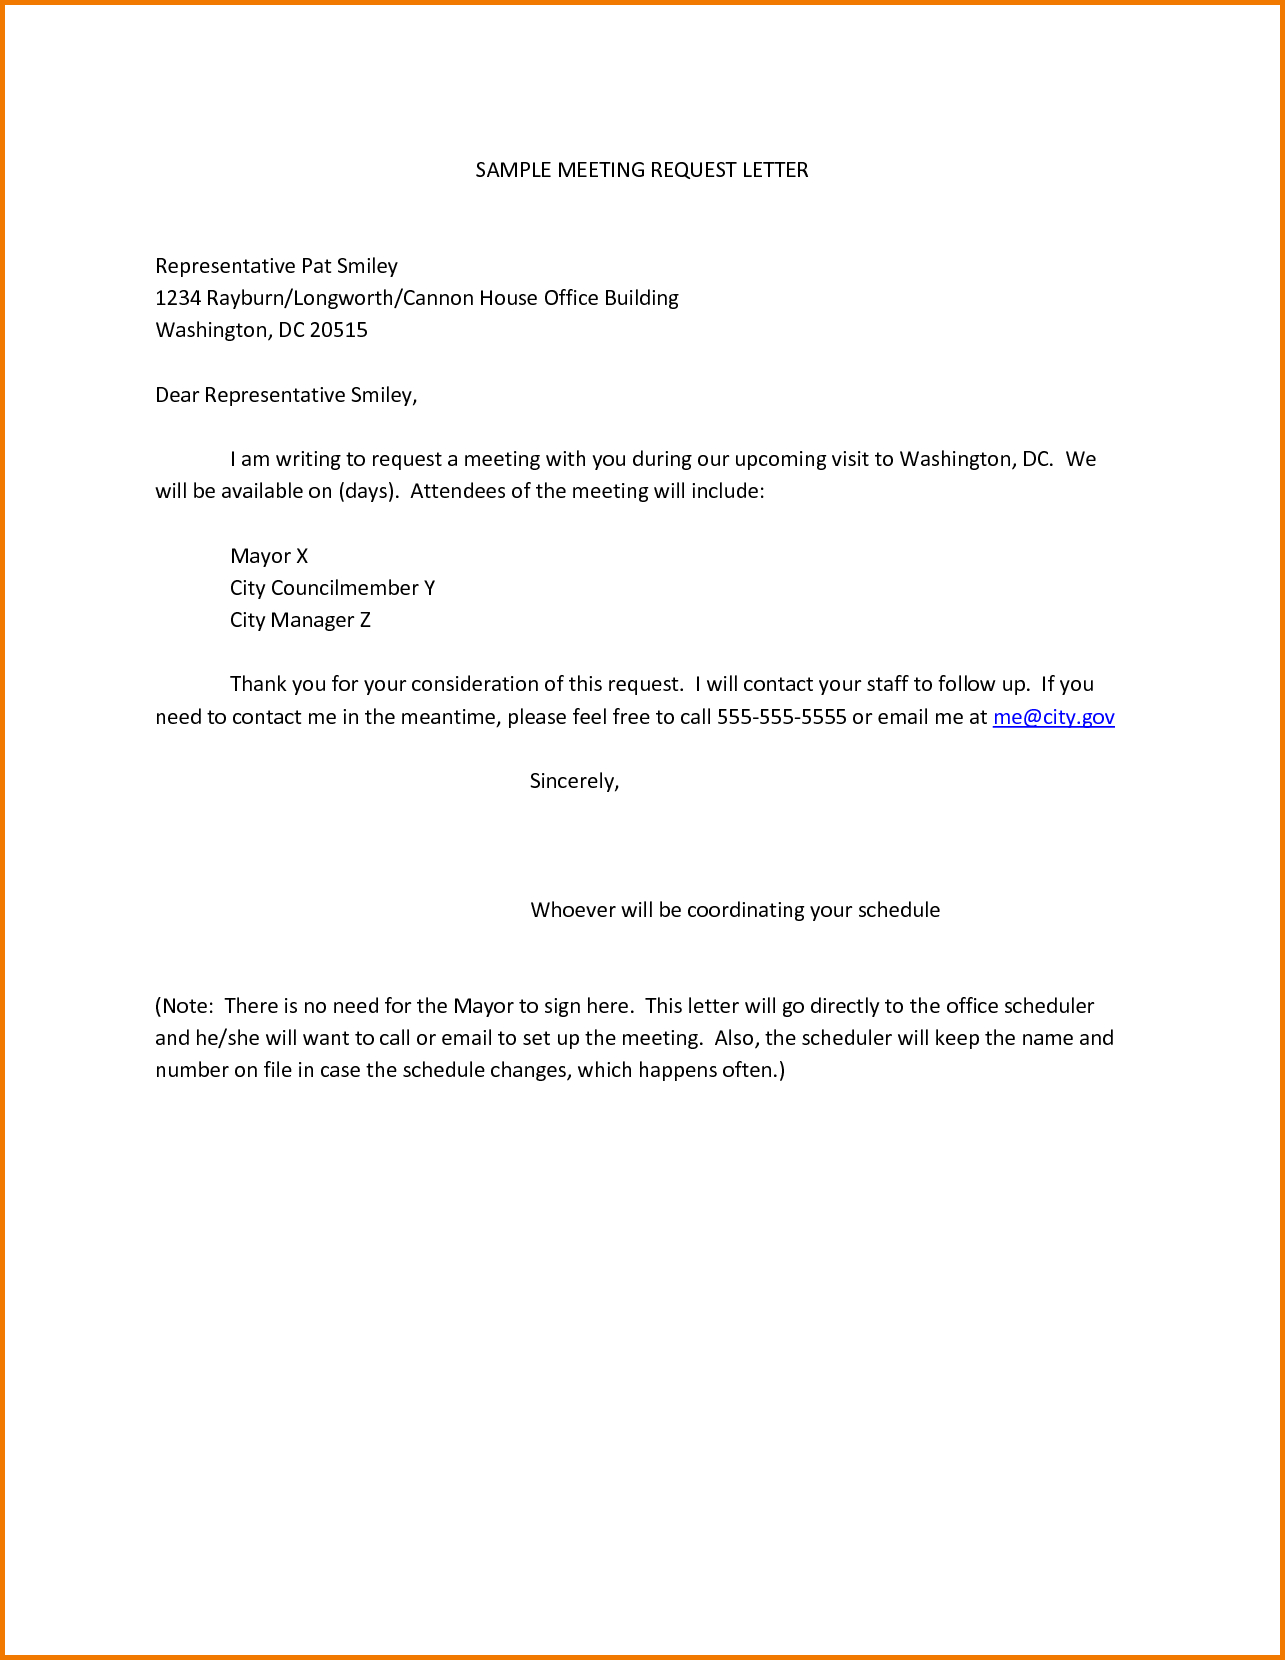 Formal Demand Letter Template - Sample Meeting Request Letter Representative Pat Smiley Rayburn